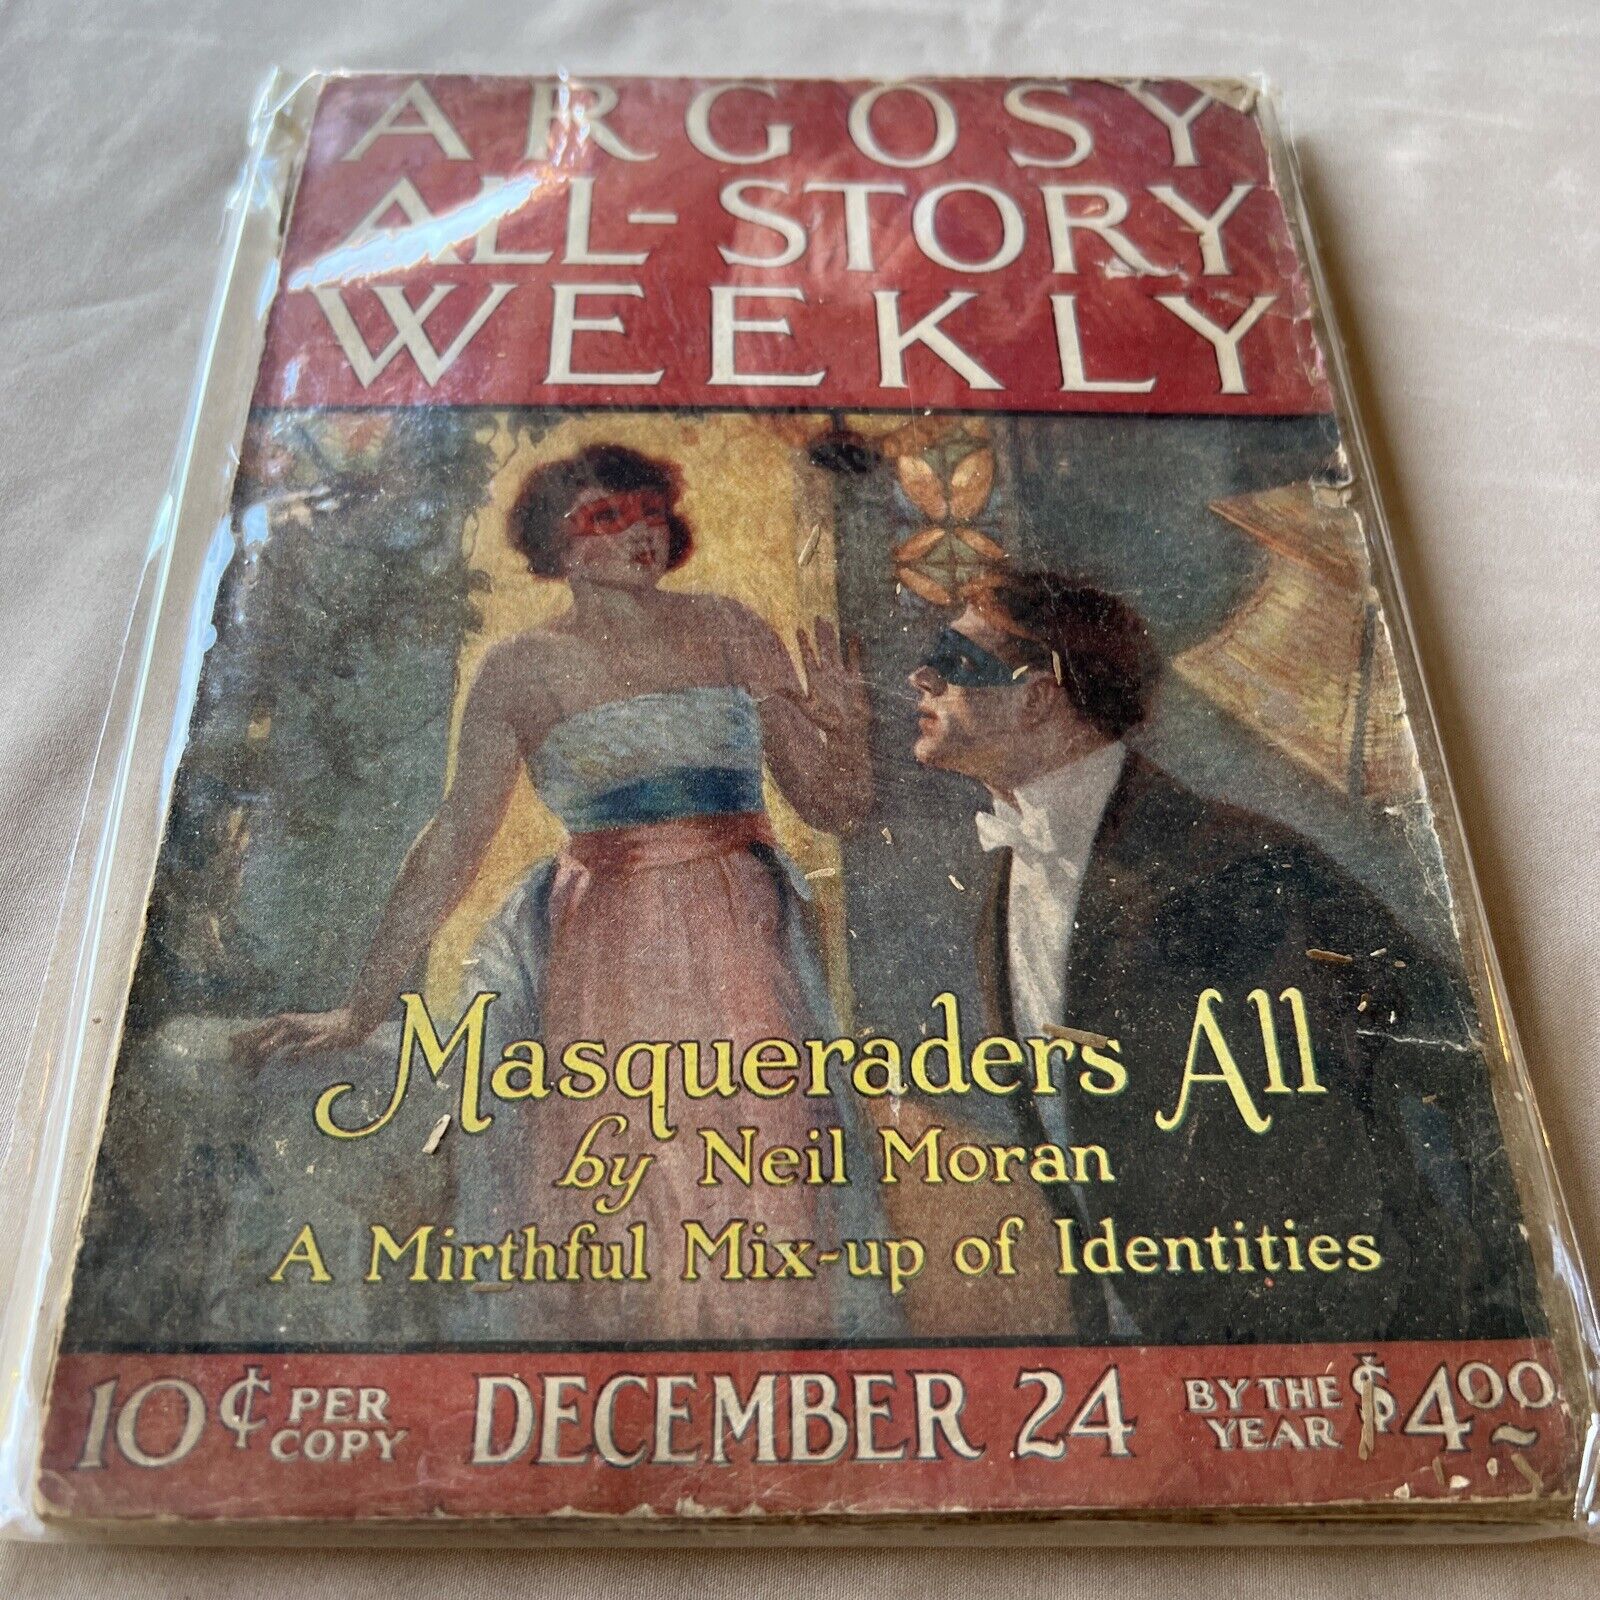 Argosy All-Story Weekly December 24 1921 Masqueraders All